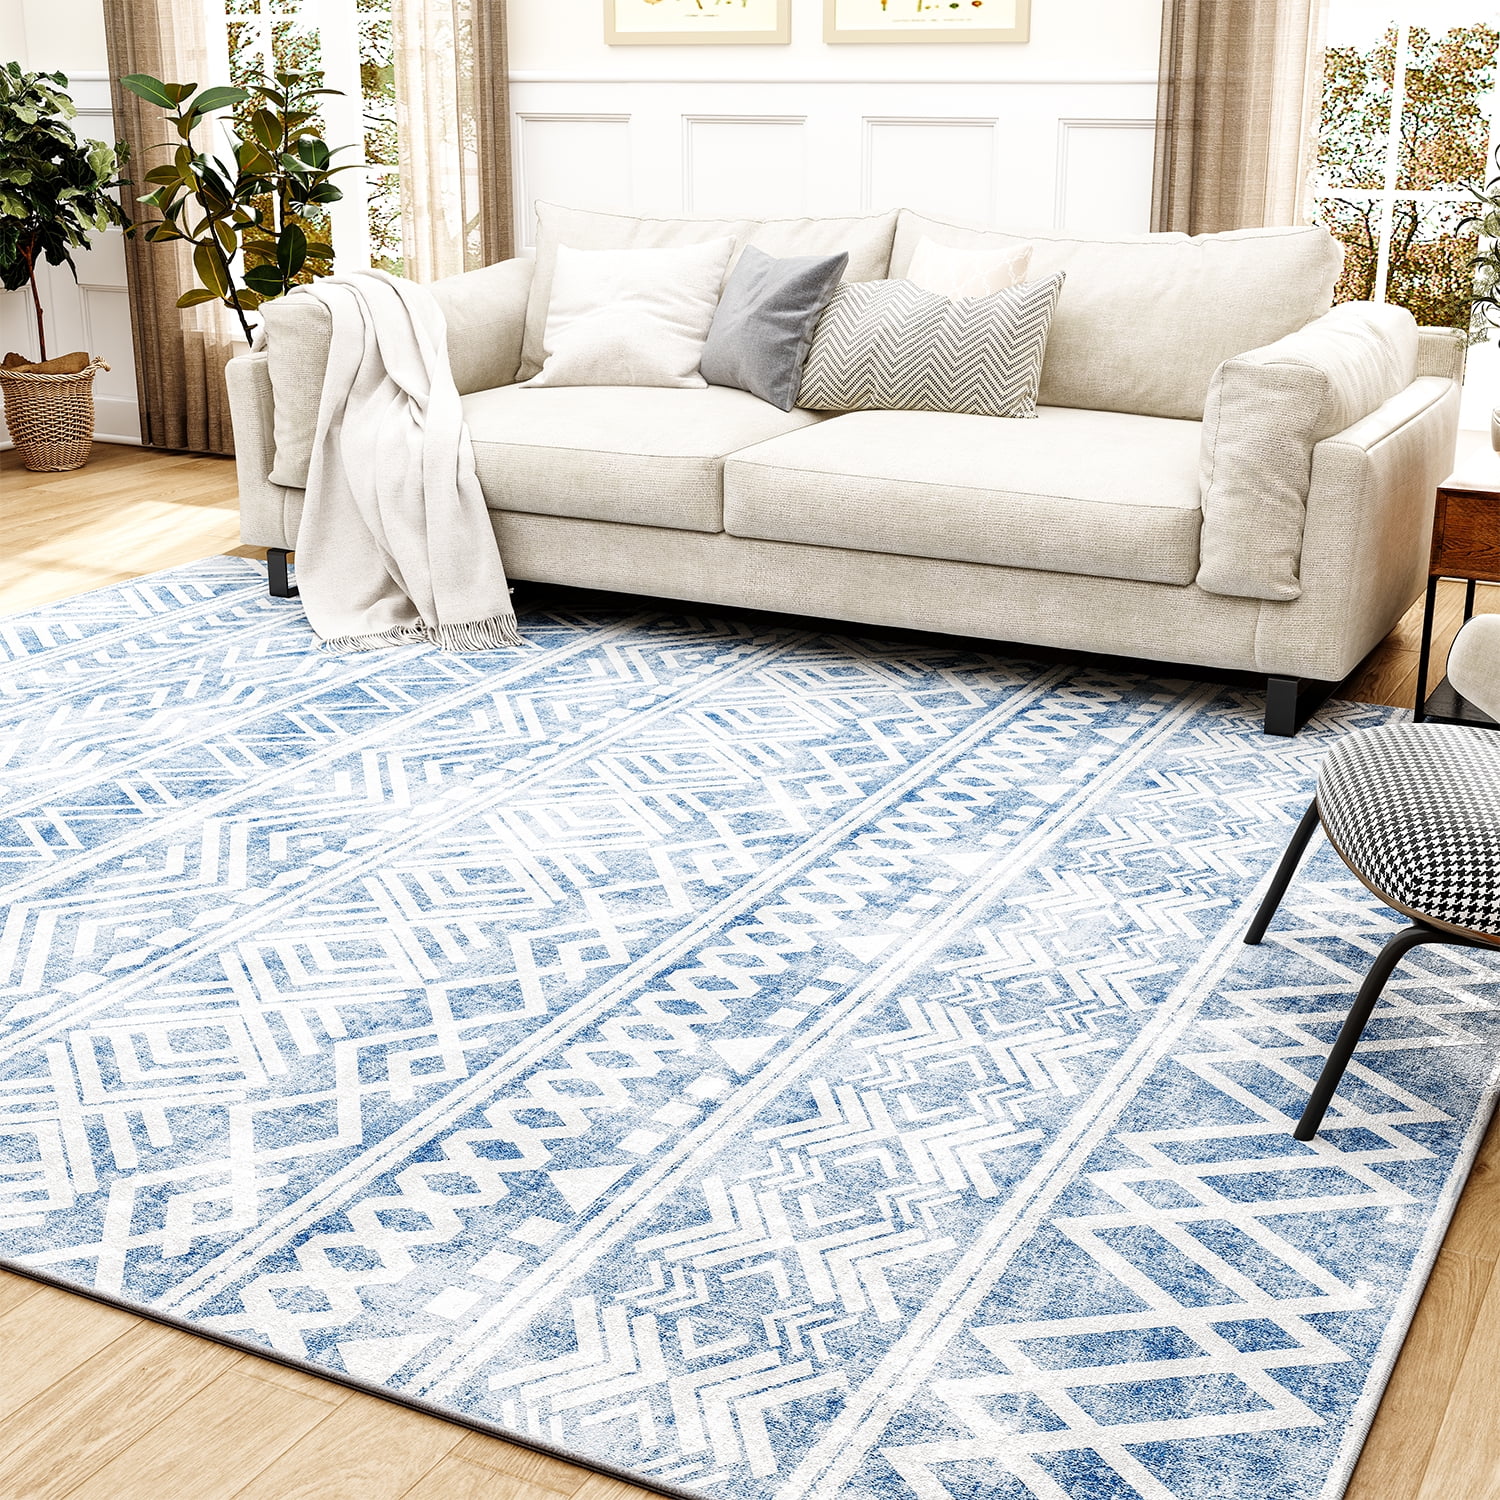  Area Rug Living Room Carpet: 5x7 Large Moroccan Soft Fluffy  Geometric Washable Bedroom Rugs Dining Room Home Office Nursery Low Pile  Decor Under Kitchen Table Blue/Ivory : Home & Kitchen